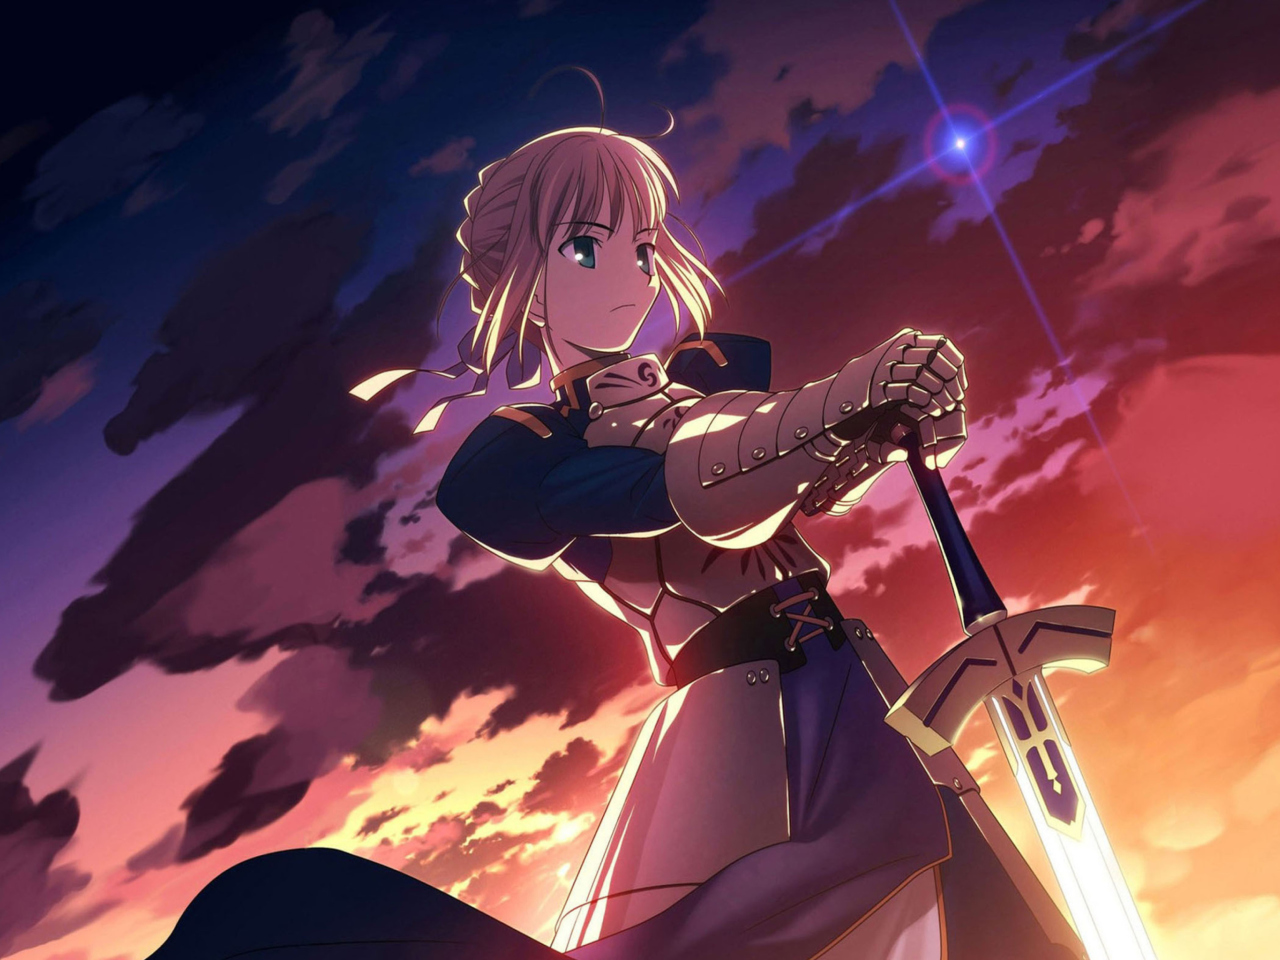 Saber from Fate/stay night wallpaper 1280x960